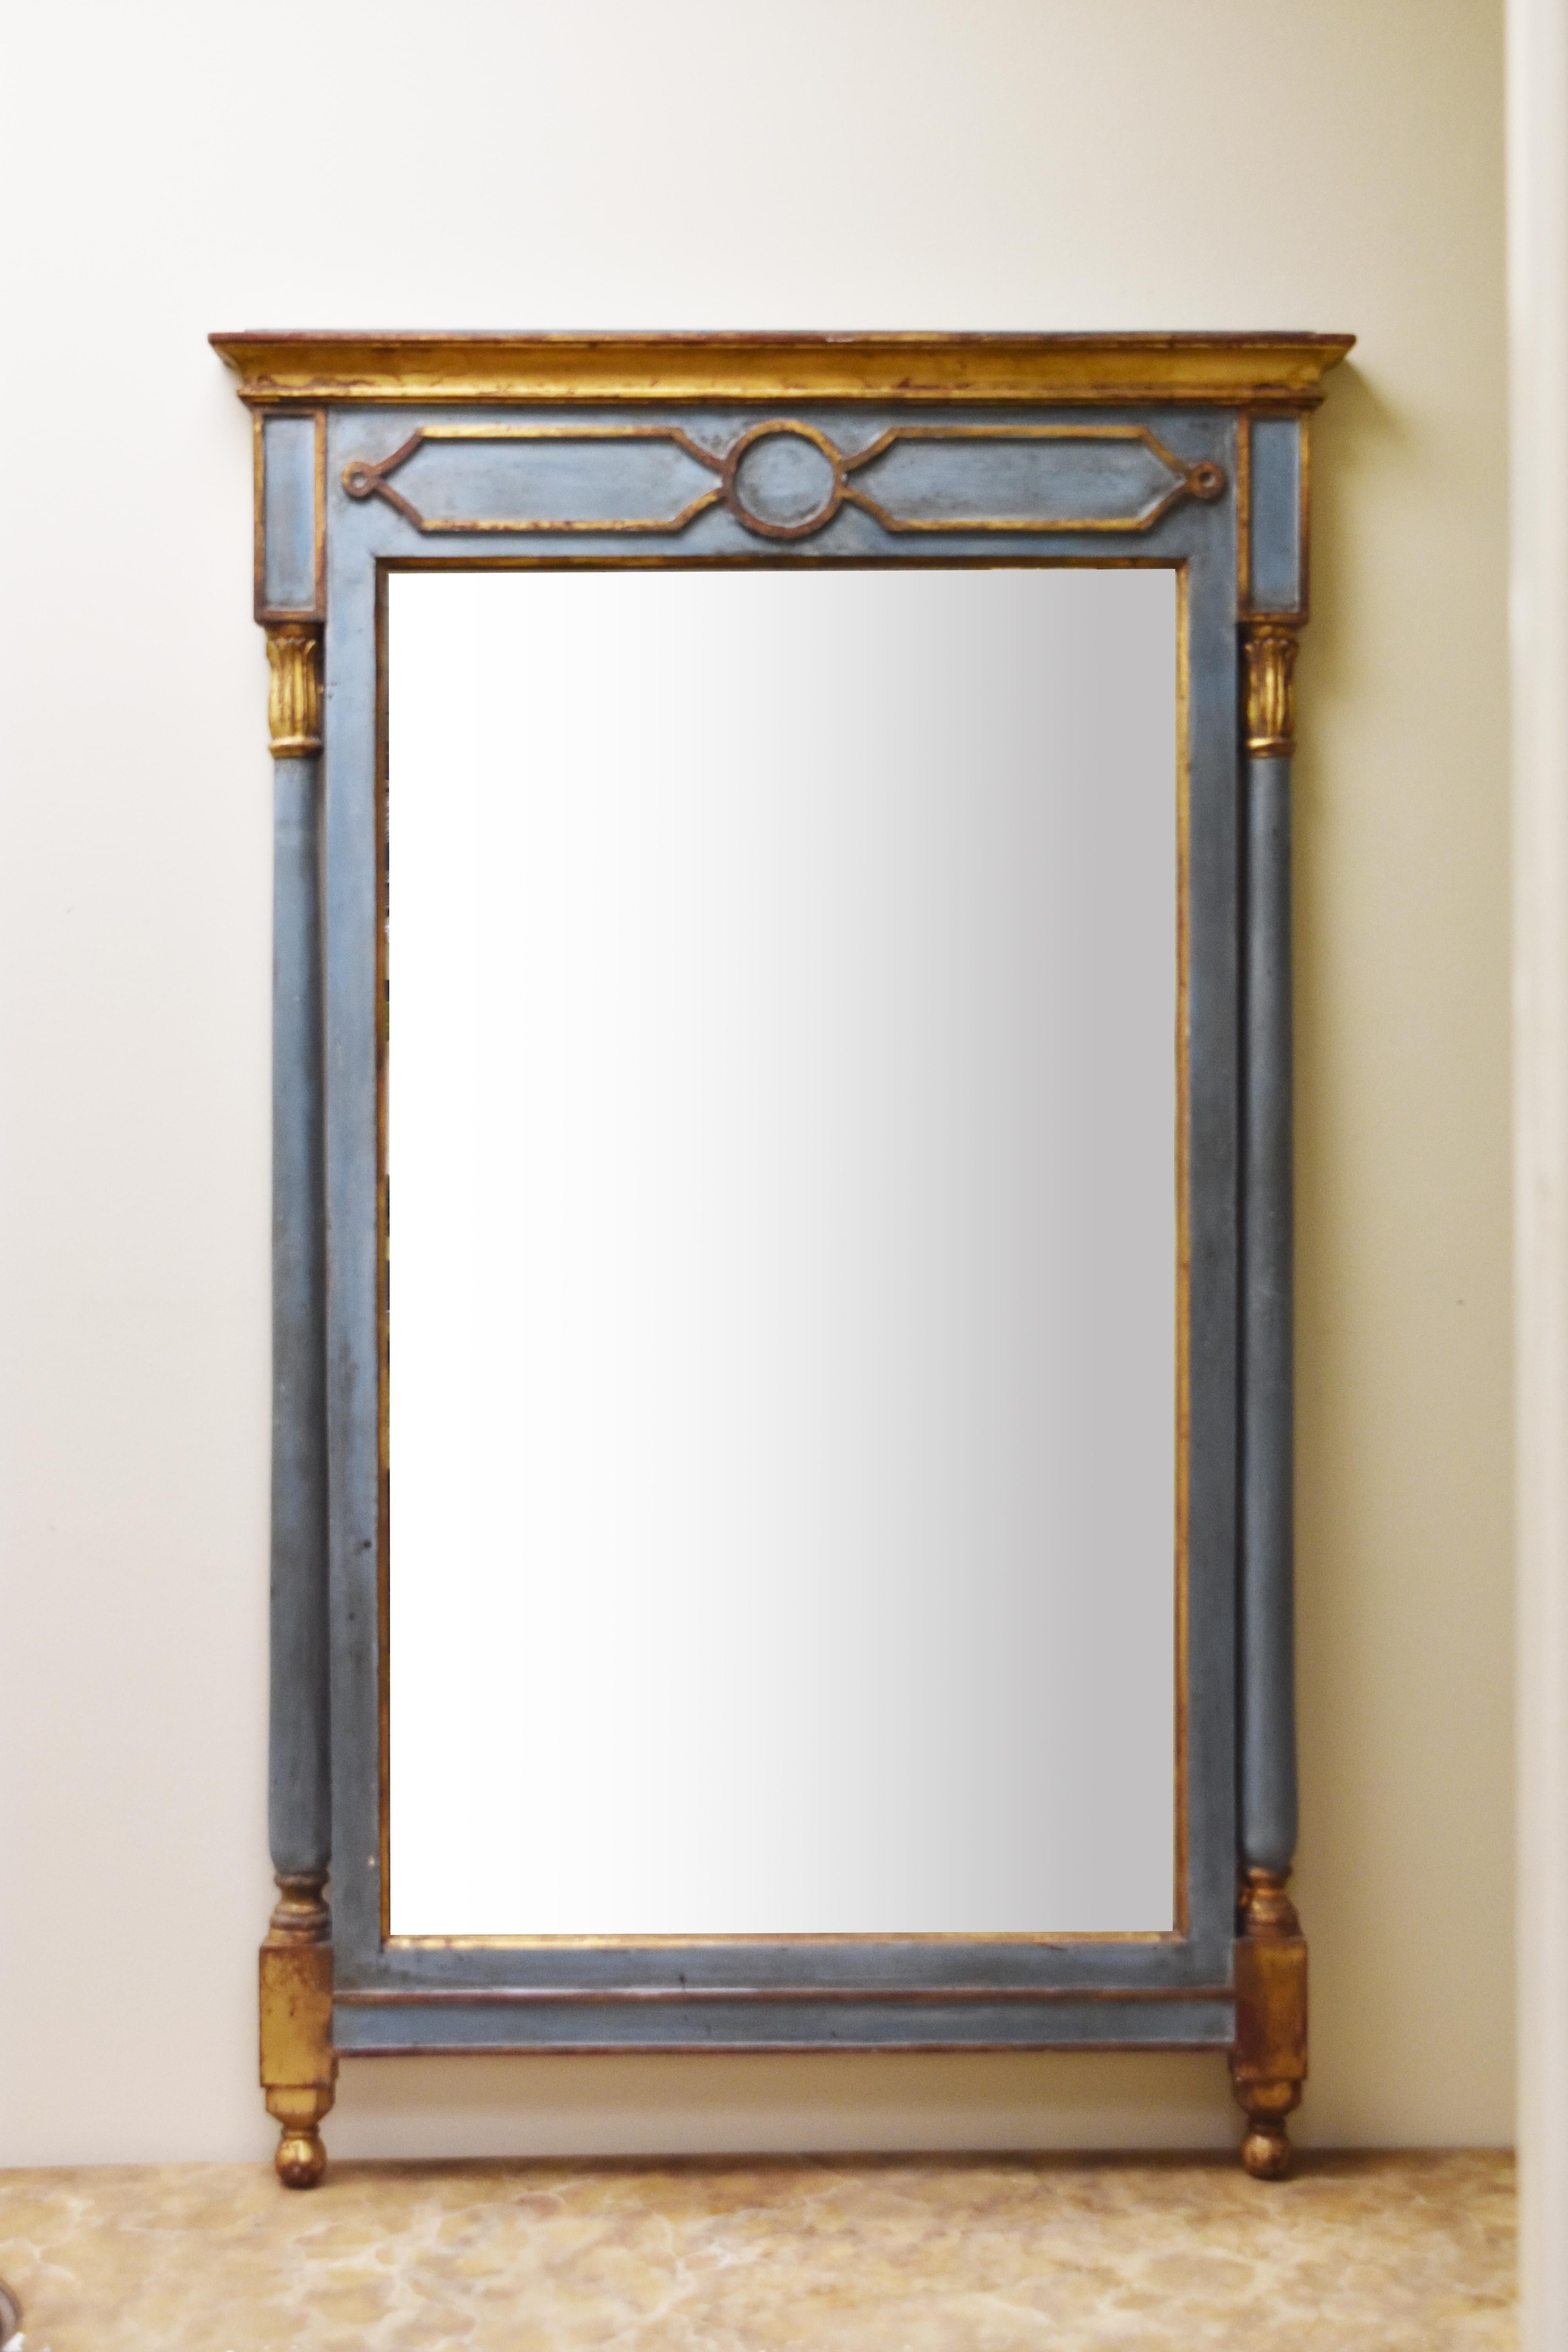 This pair of French mirrors is finished with blue paint and gilt accents. The glass appears to be old with minor imperfections.